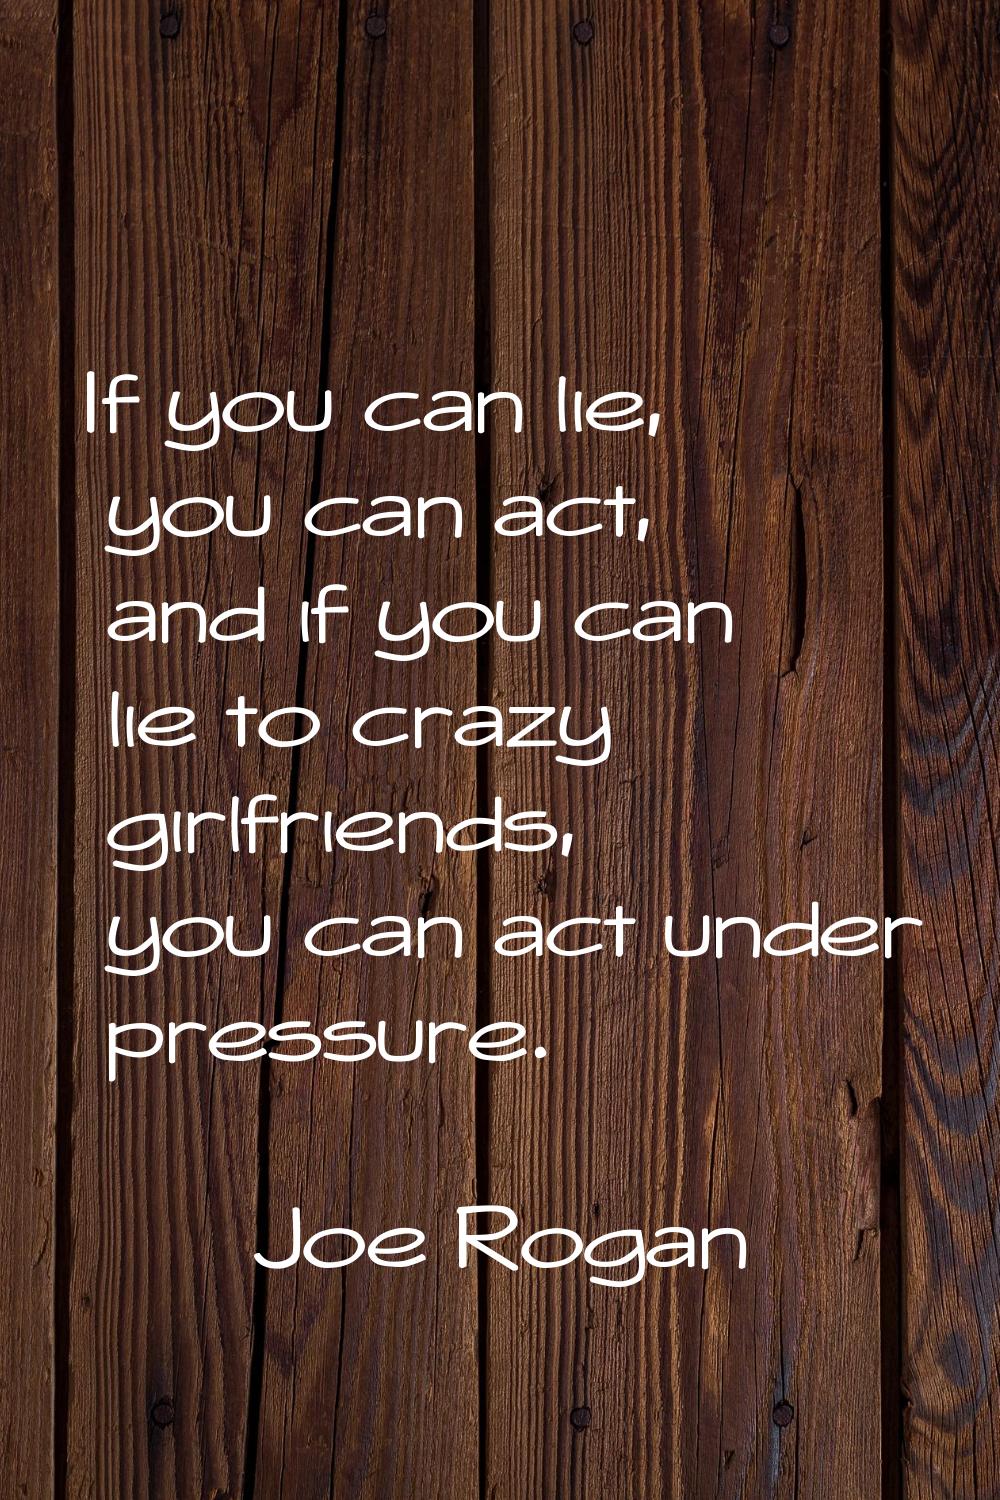 If you can lie, you can act, and if you can lie to crazy girlfriends, you can act under pressure.